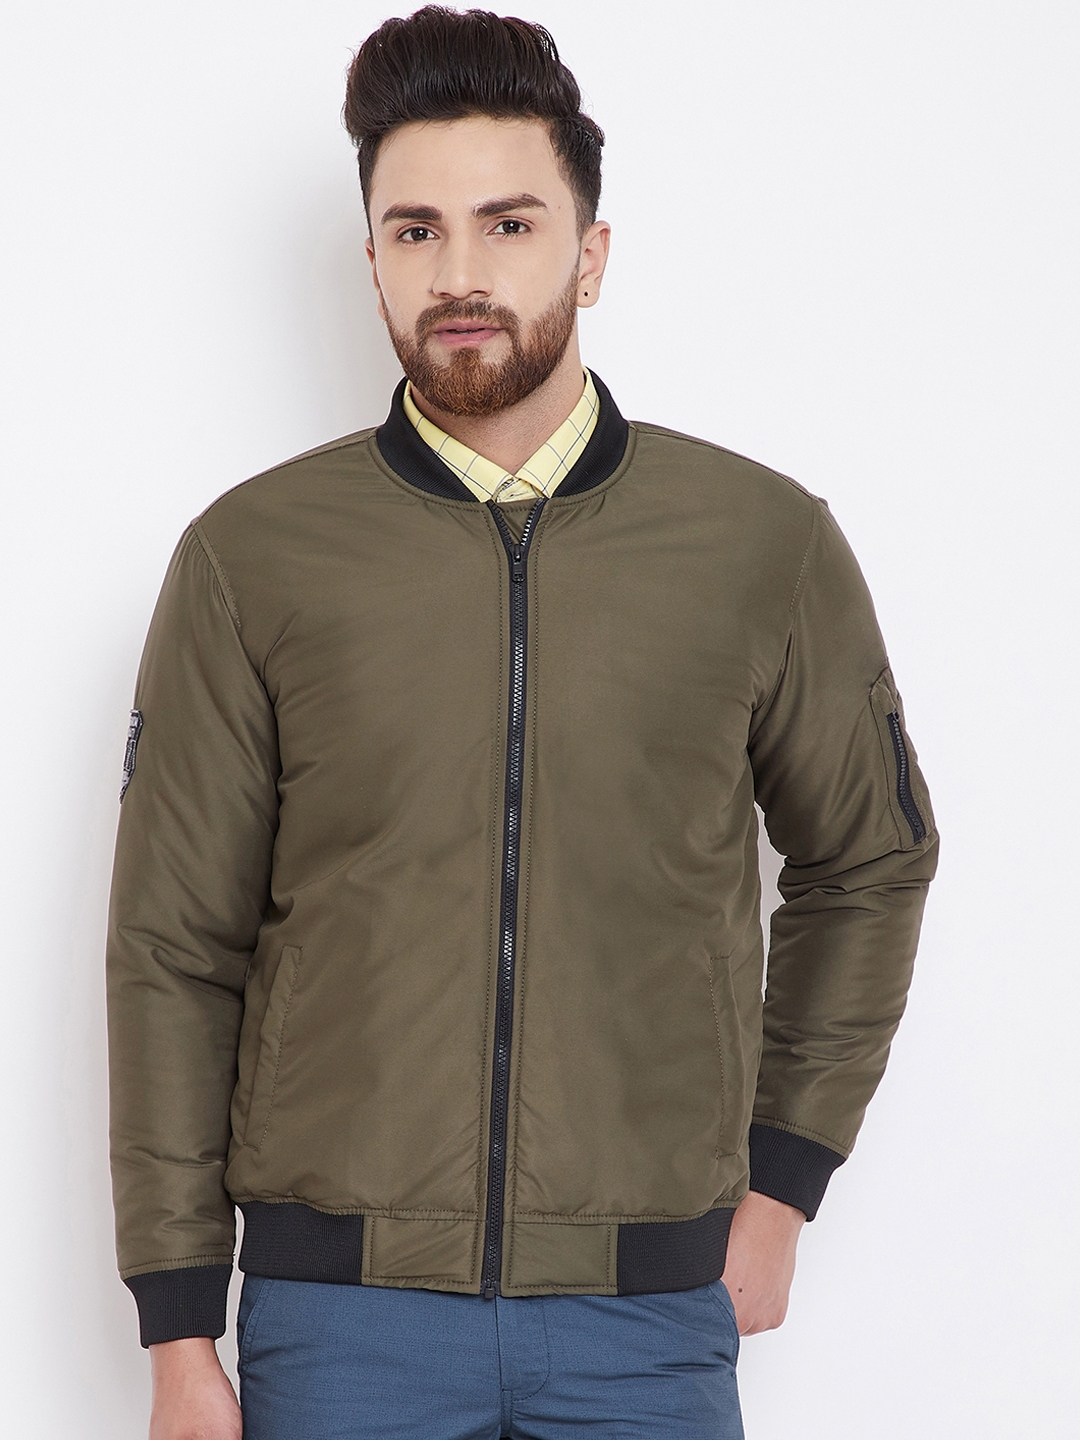 Buy Canary London Men Olive Green Solid Lightweight Bomber Jacket ...